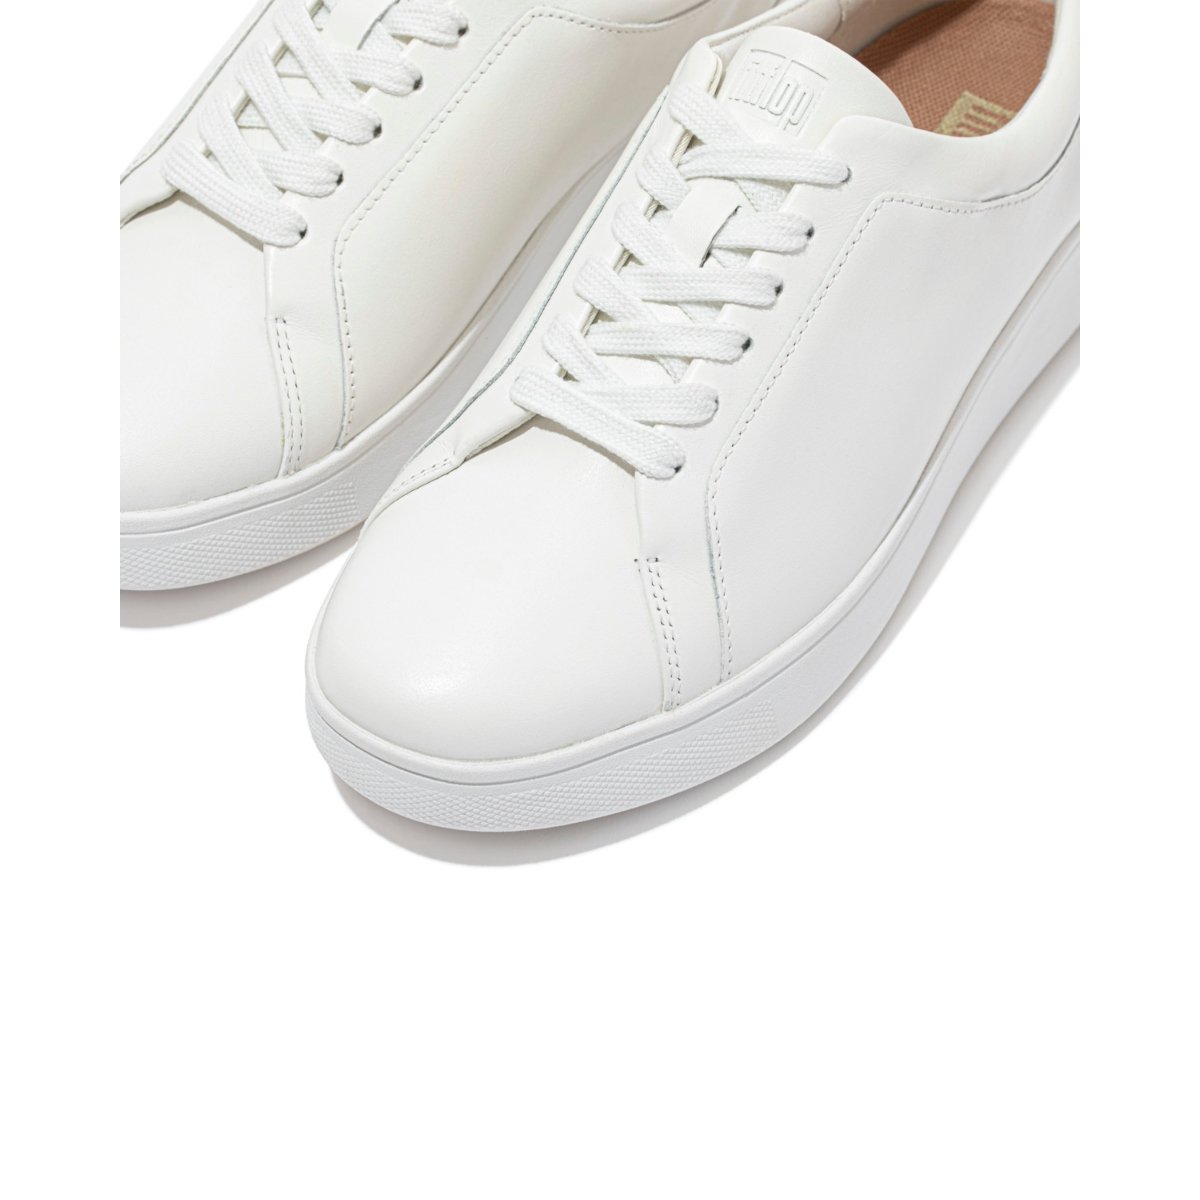 FitFlop RALLY Leather Trainers Urban White close up